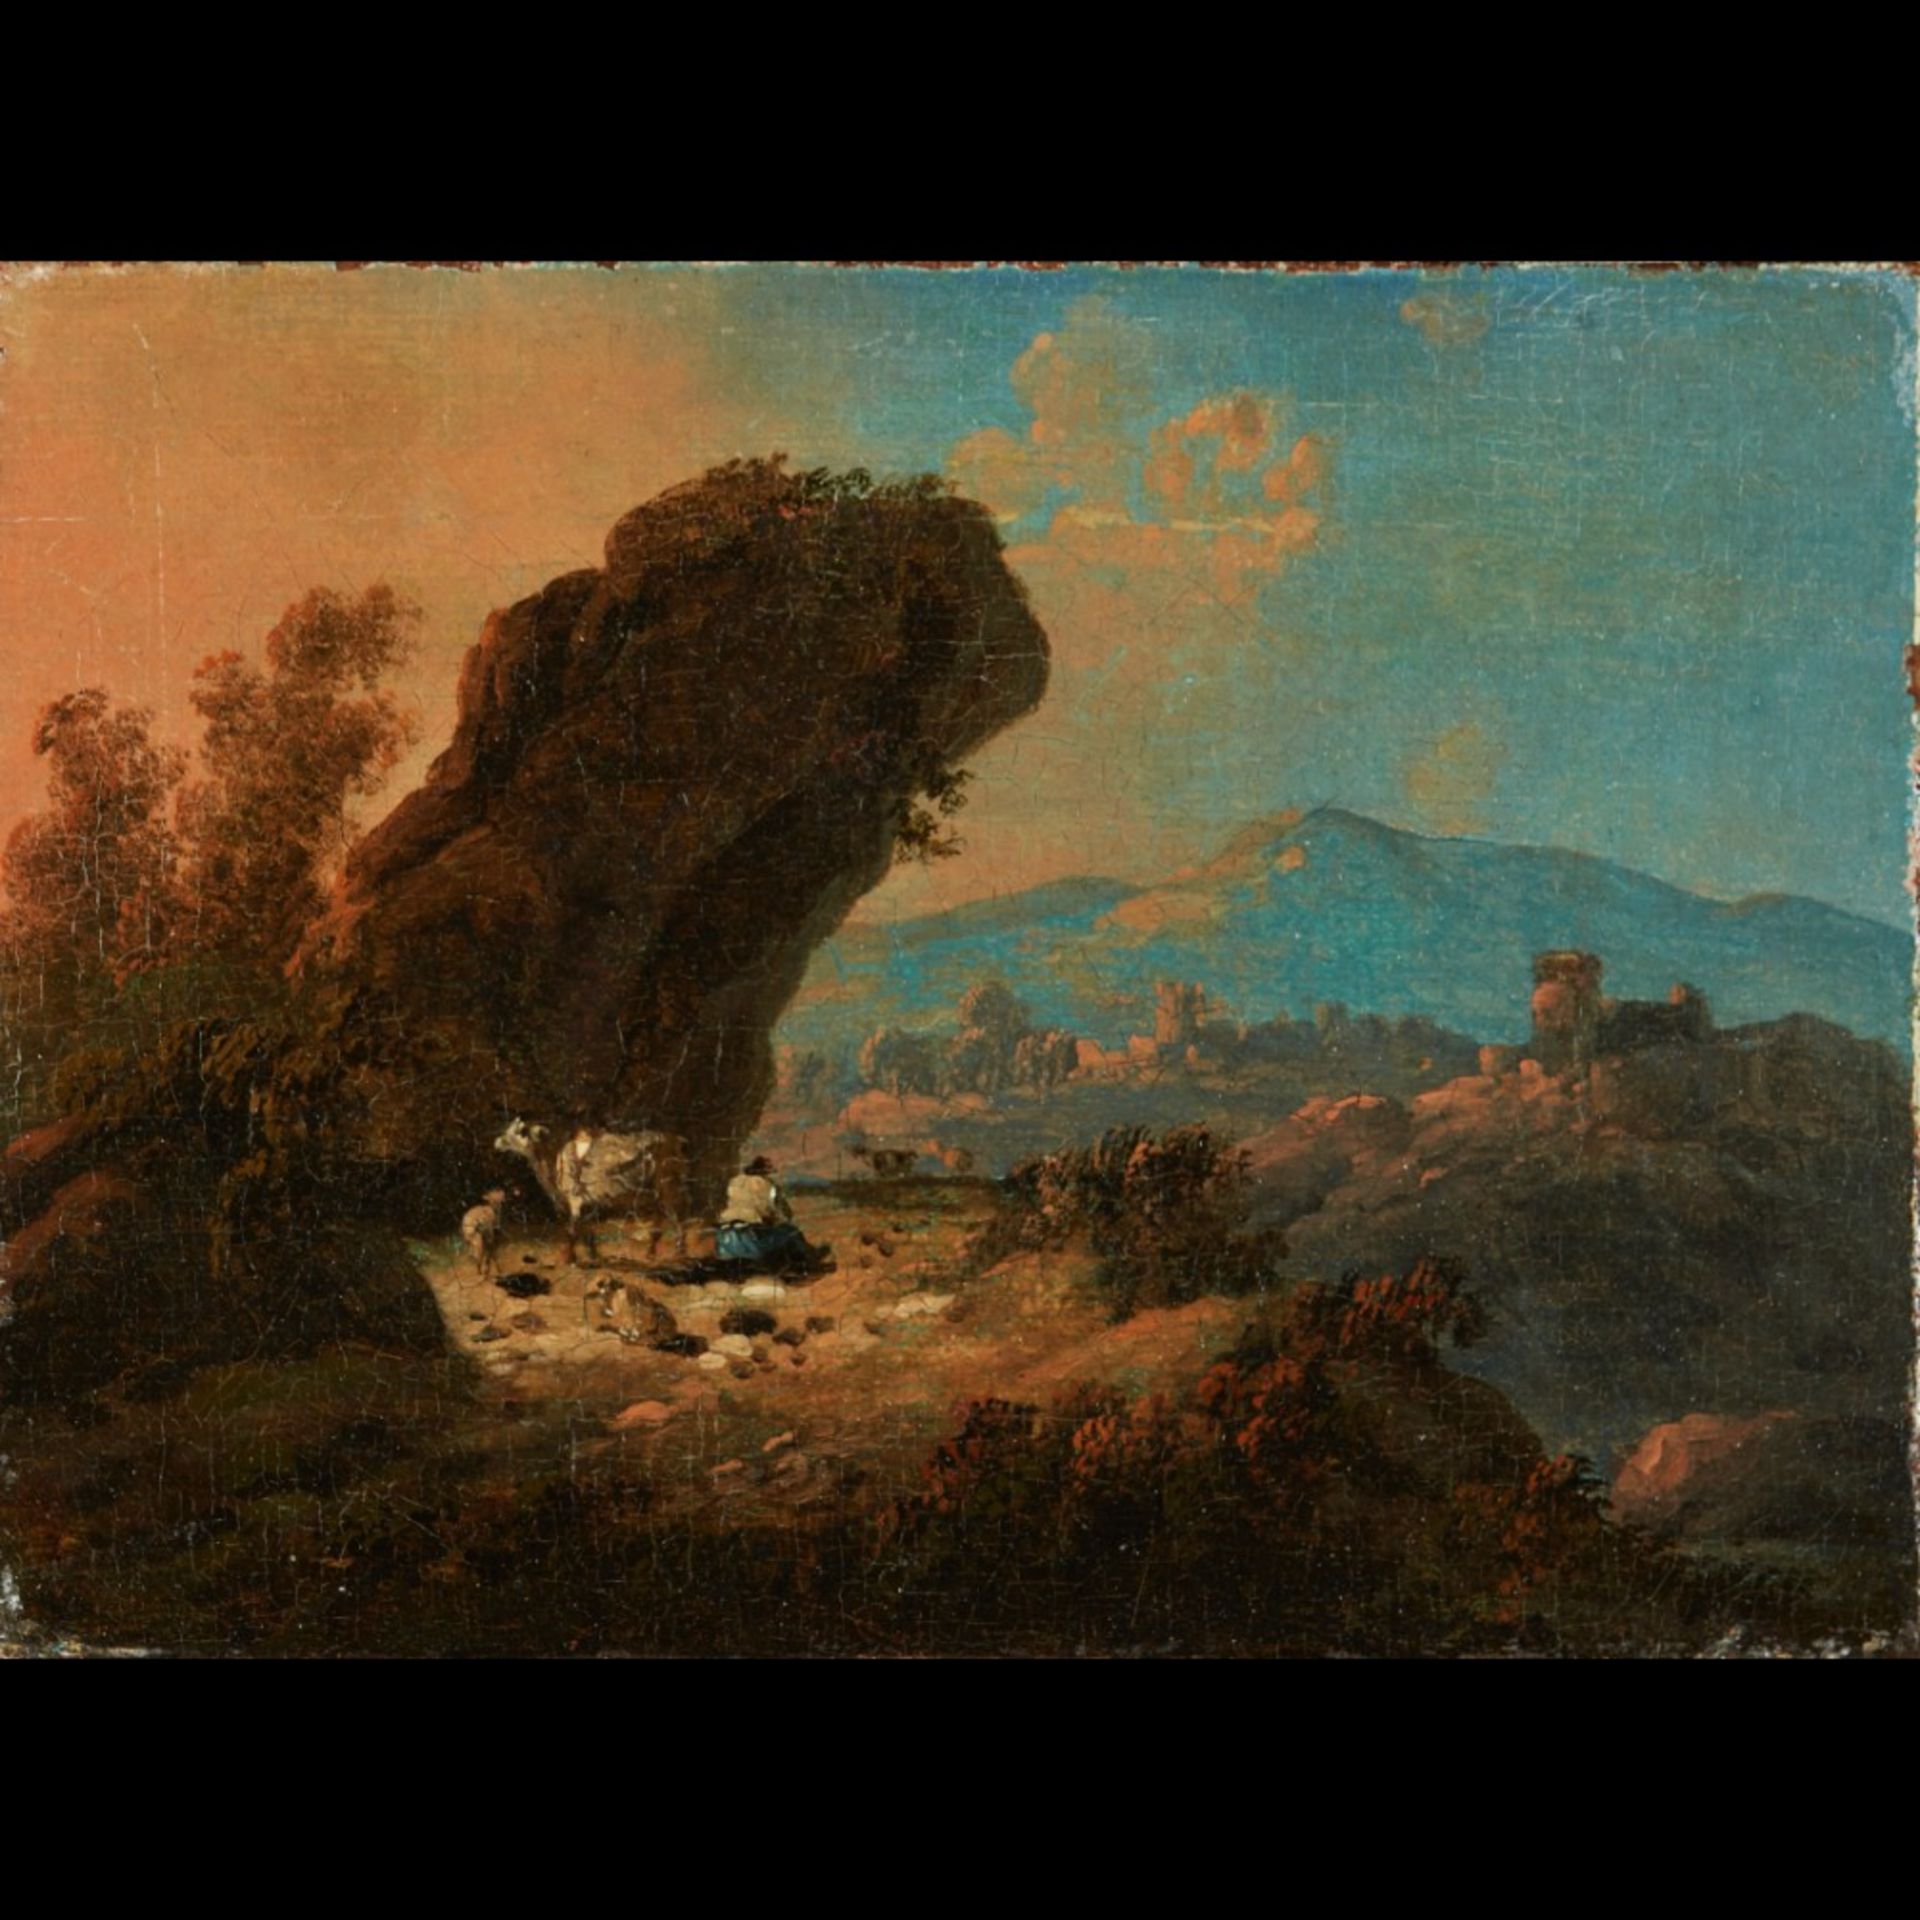 Jean Pillement Attrib. (1728-1808) Landscape with bridge and figures and Landscape with figure, catt - Image 2 of 2